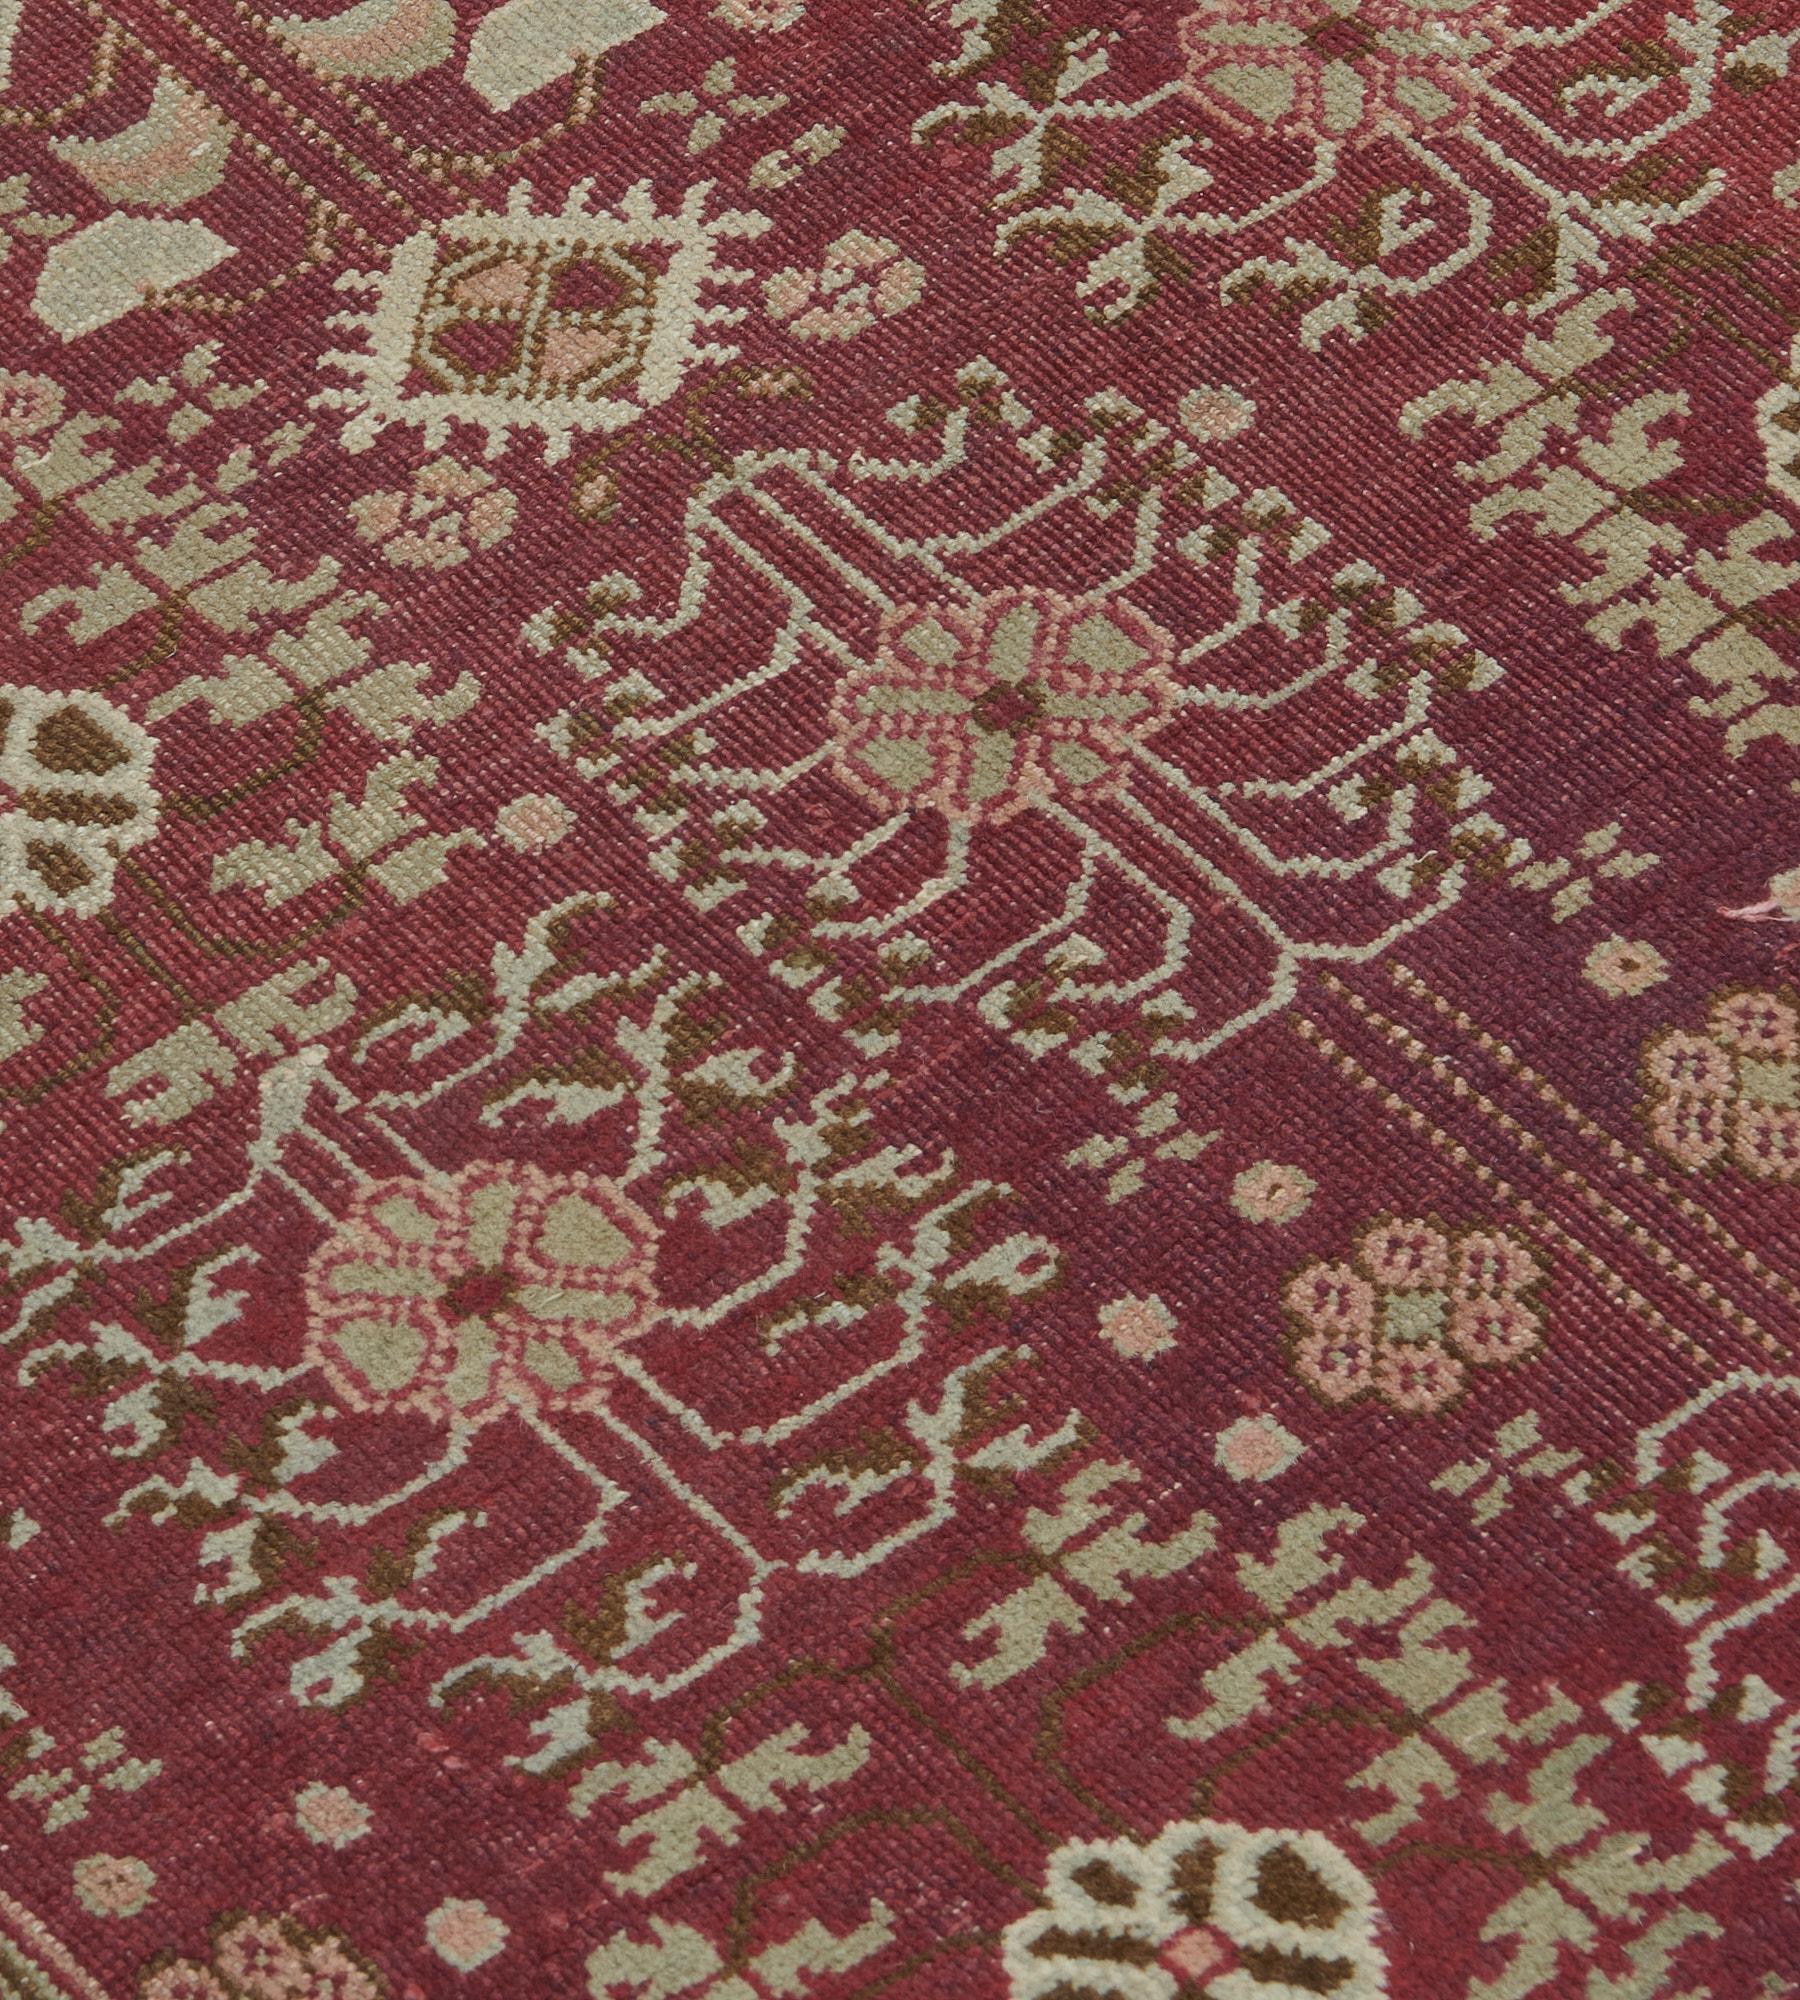 This antique, circa 1900, Agra runner has a shaded blackcurrant-red field with an overall design of vertical rows of ivory and buff-brown floral sprays enclosing a single rosette alternating with a similar central rosette issuing angular flowerhead